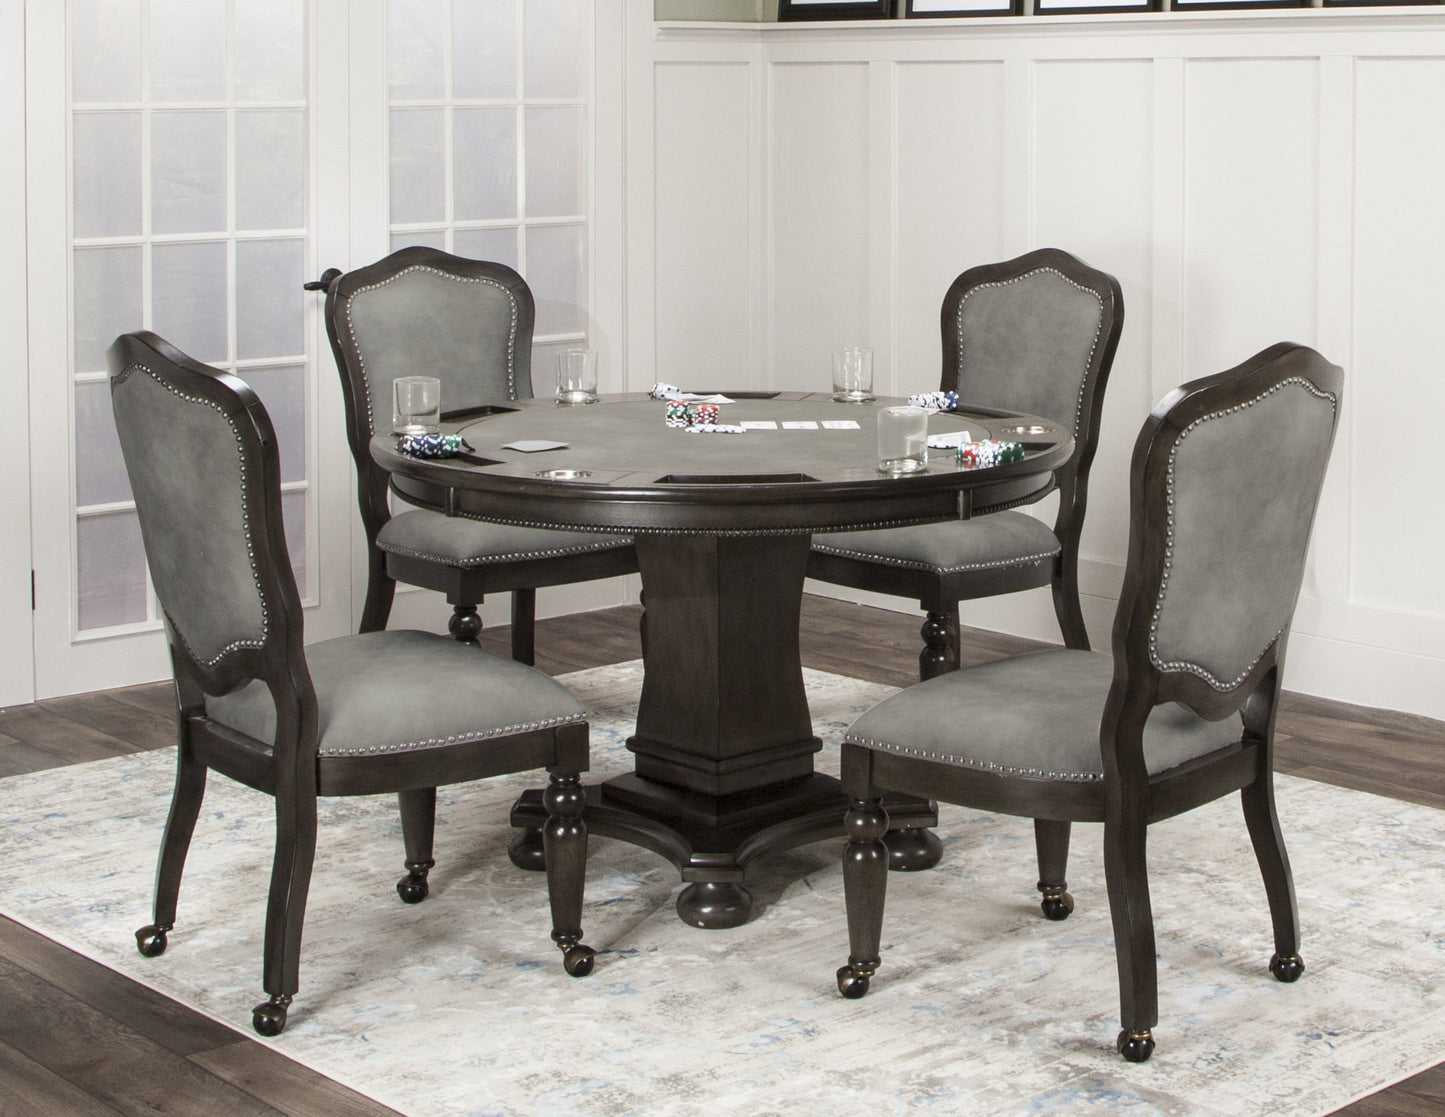 Five piece game table set showing the poker table. 